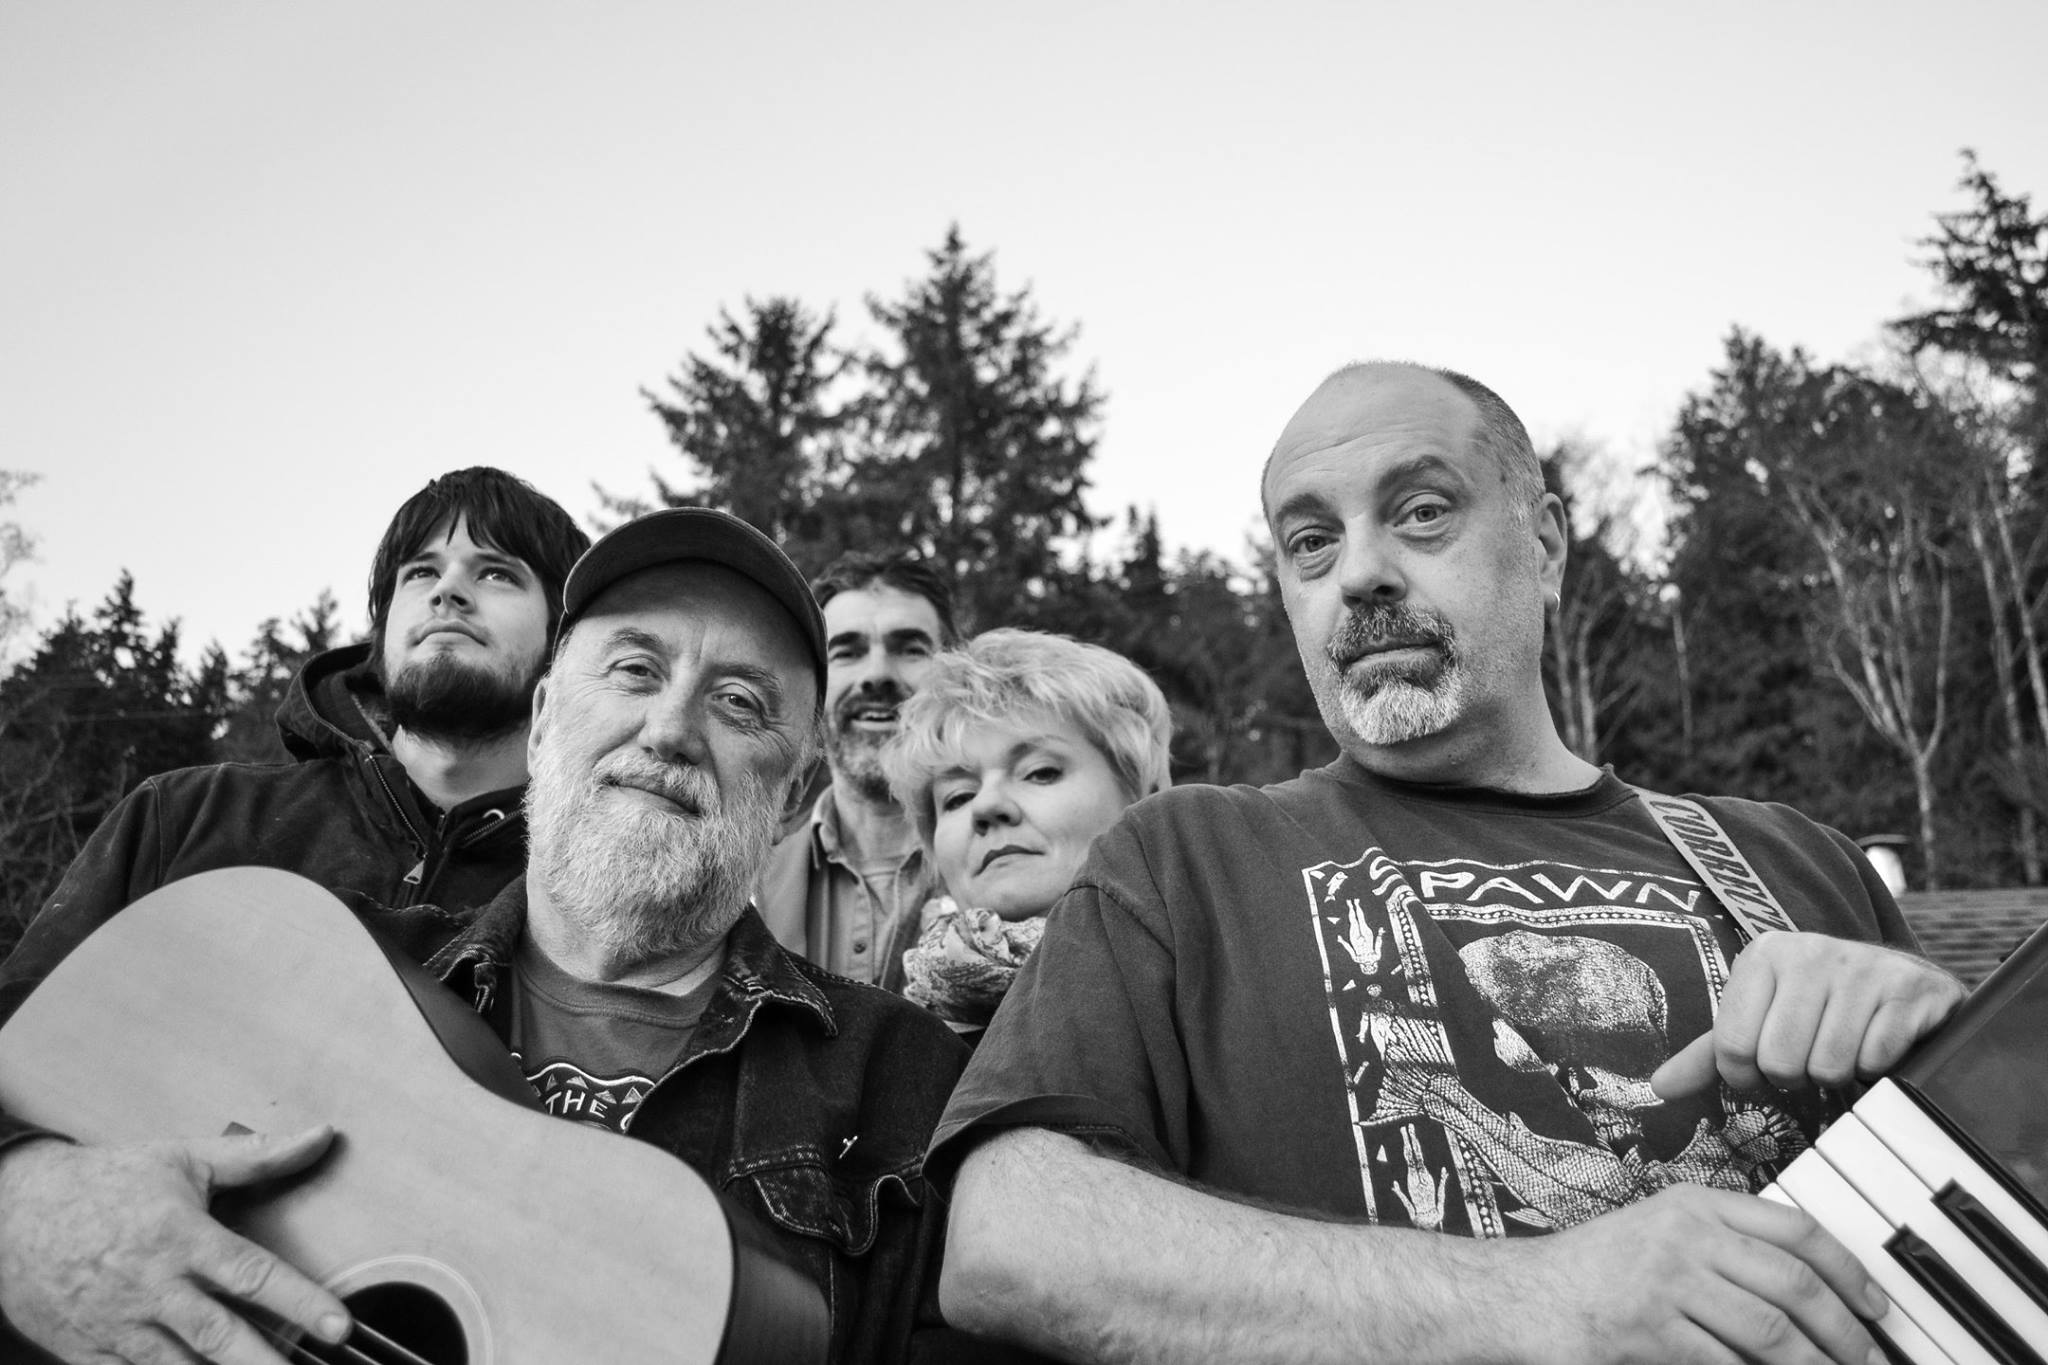 Ray Troll and the Ratfish Wranglers perform Thursday, Feb. 1 at 7:00 @360 and Friday, Feb. 2 at 7:00 at the JACC for the American Salmon Forest fundraiser. (Photo courtesy of the artist)